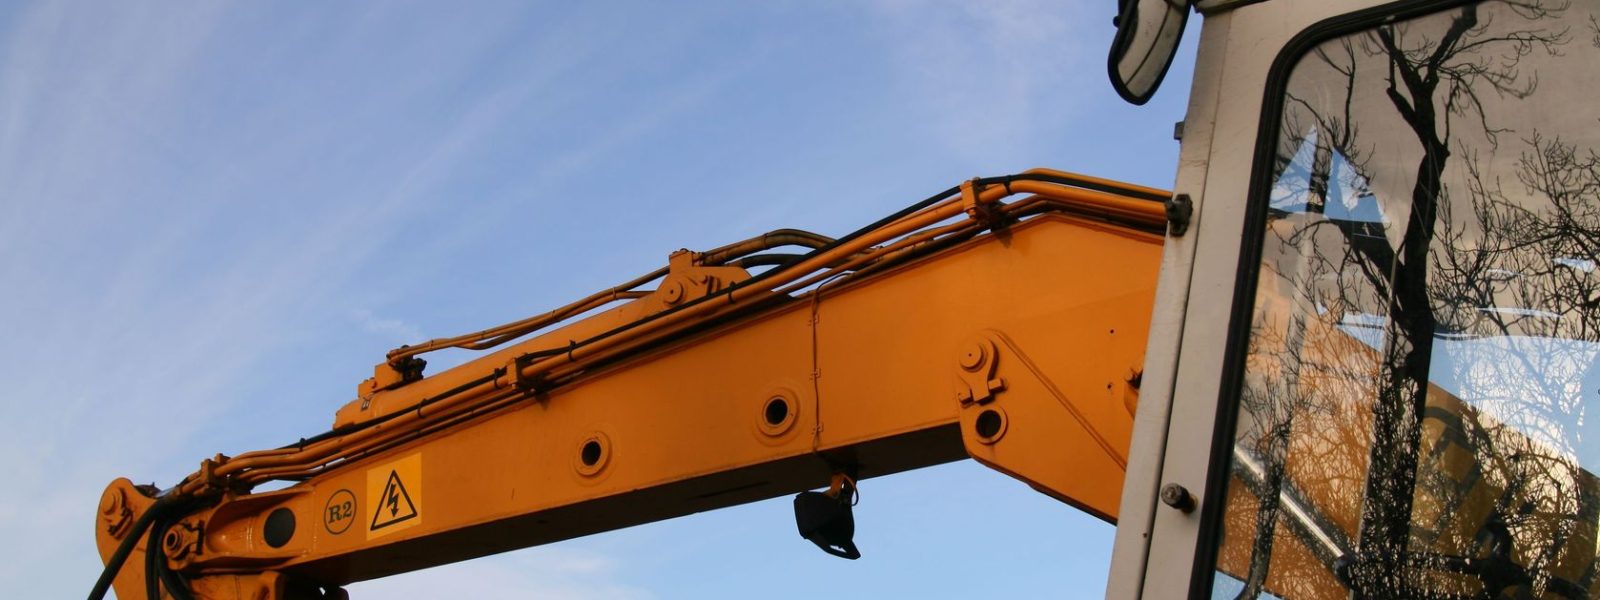 T Swaine Digger Plant Hire and Services